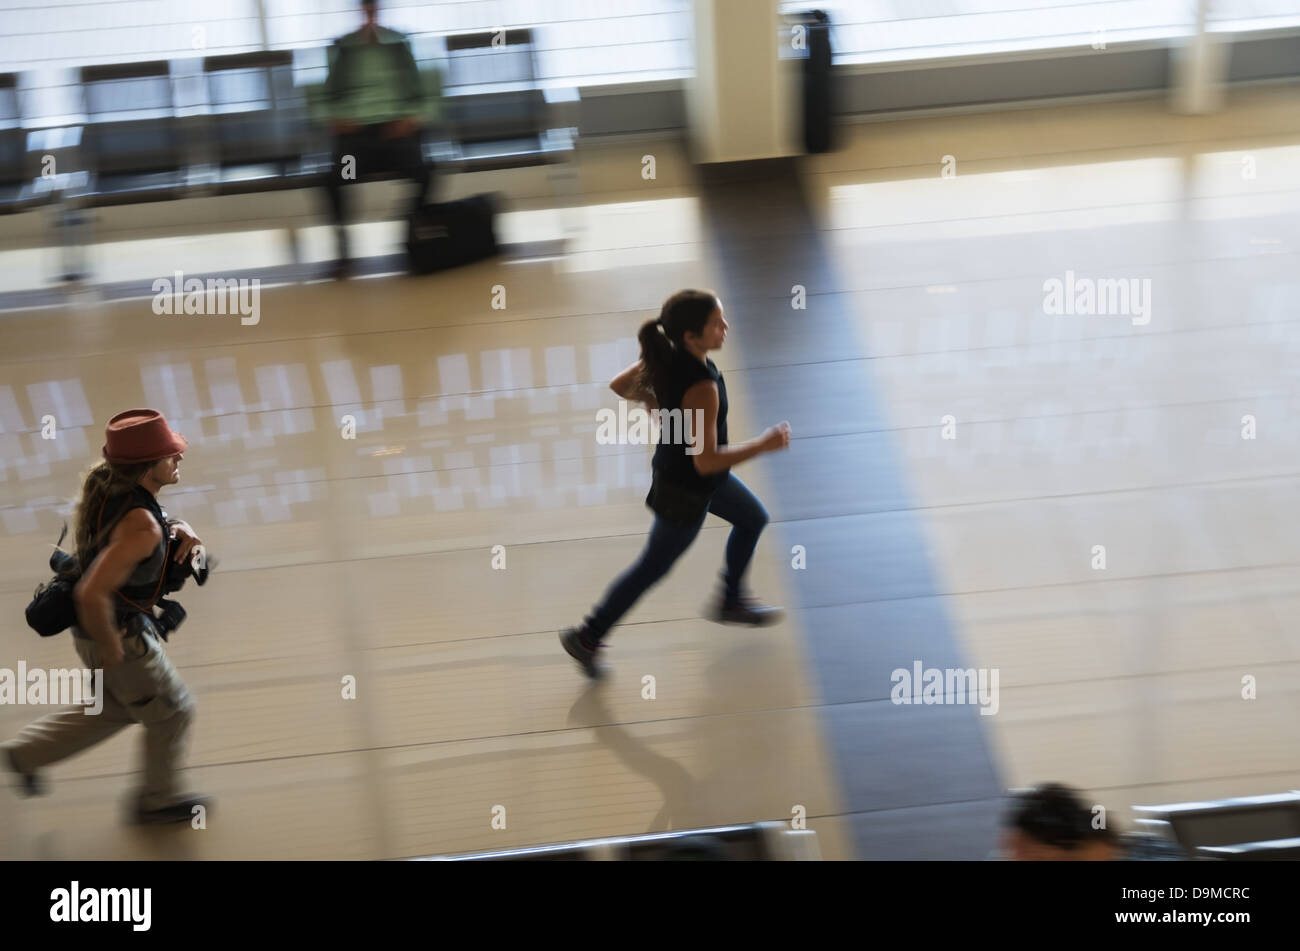 man and woman running through an airport in a rush to catch their flight Stock Photo